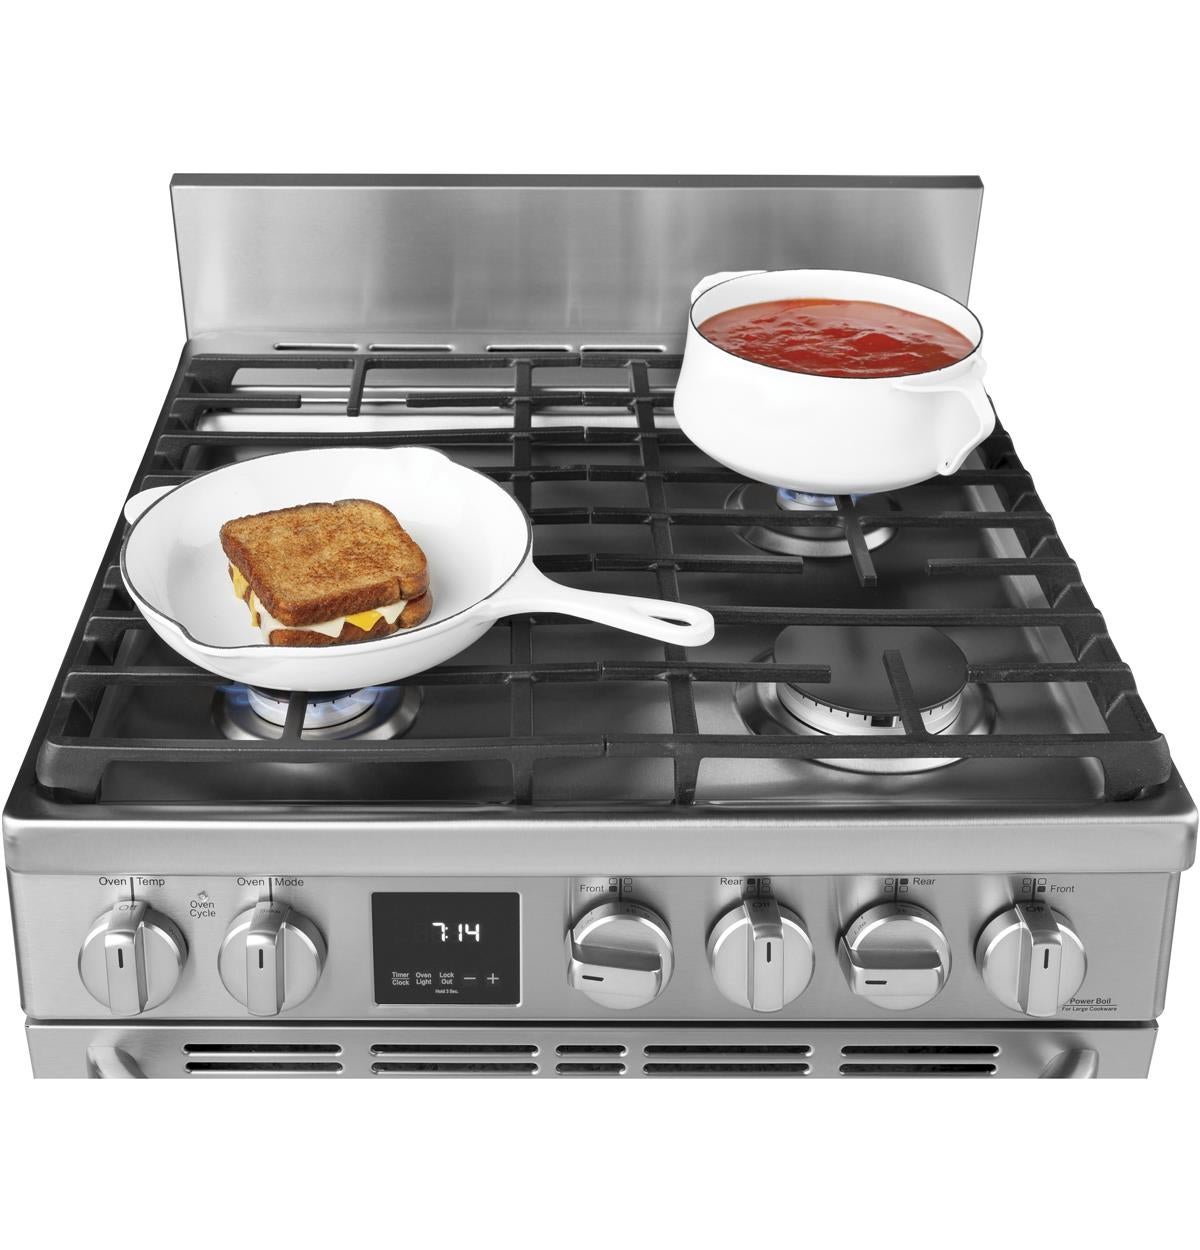 Edge-to-edge Cooktop With Heavy-duty Continuous Cast-iron Grates